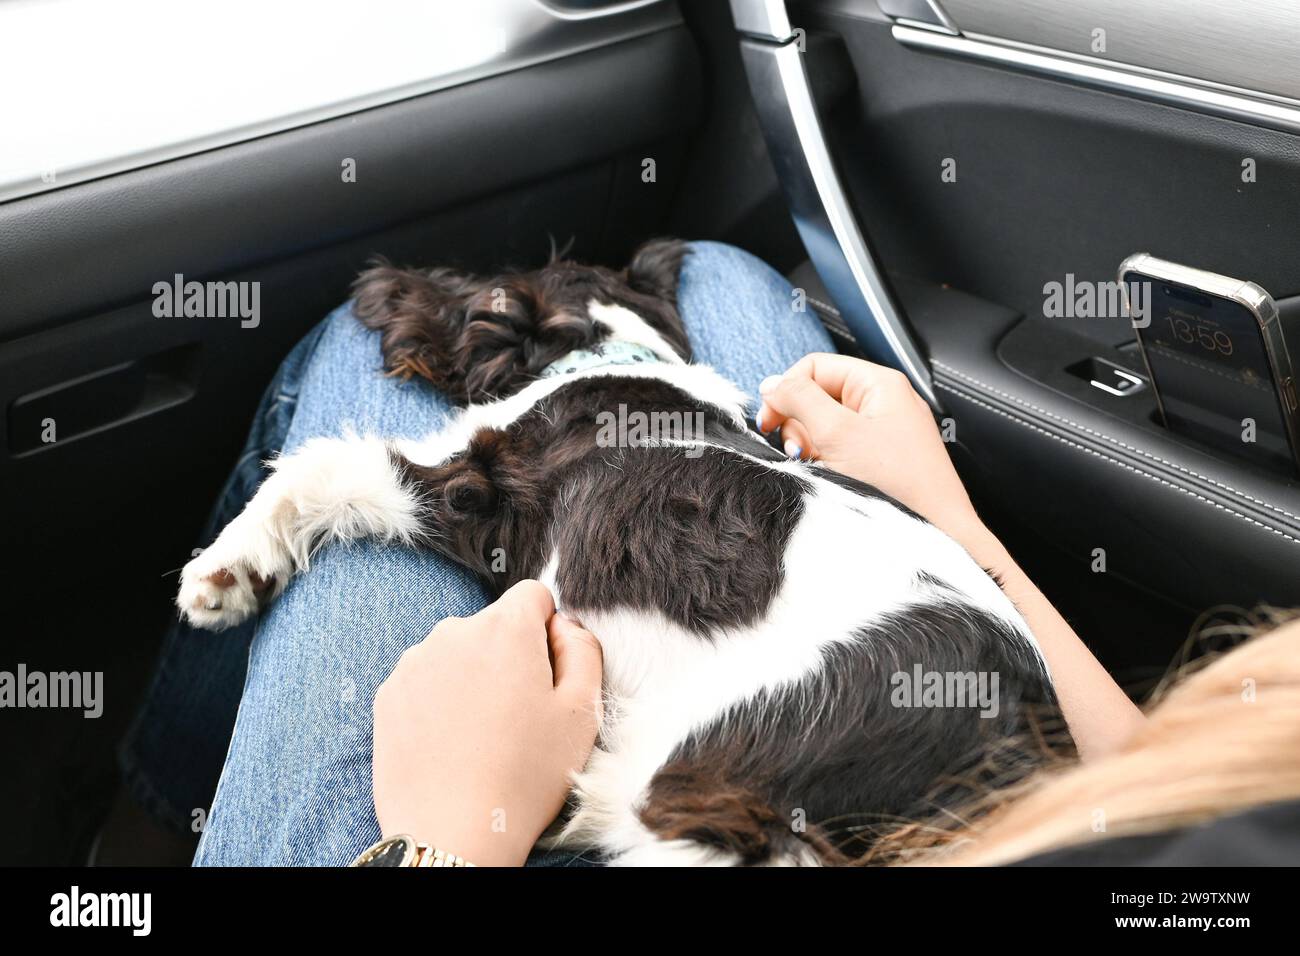 Transportation of dogs. The Cavalier King Charles Spaniel puppy sleeps on the car seat on its owner's lap Stock Photo